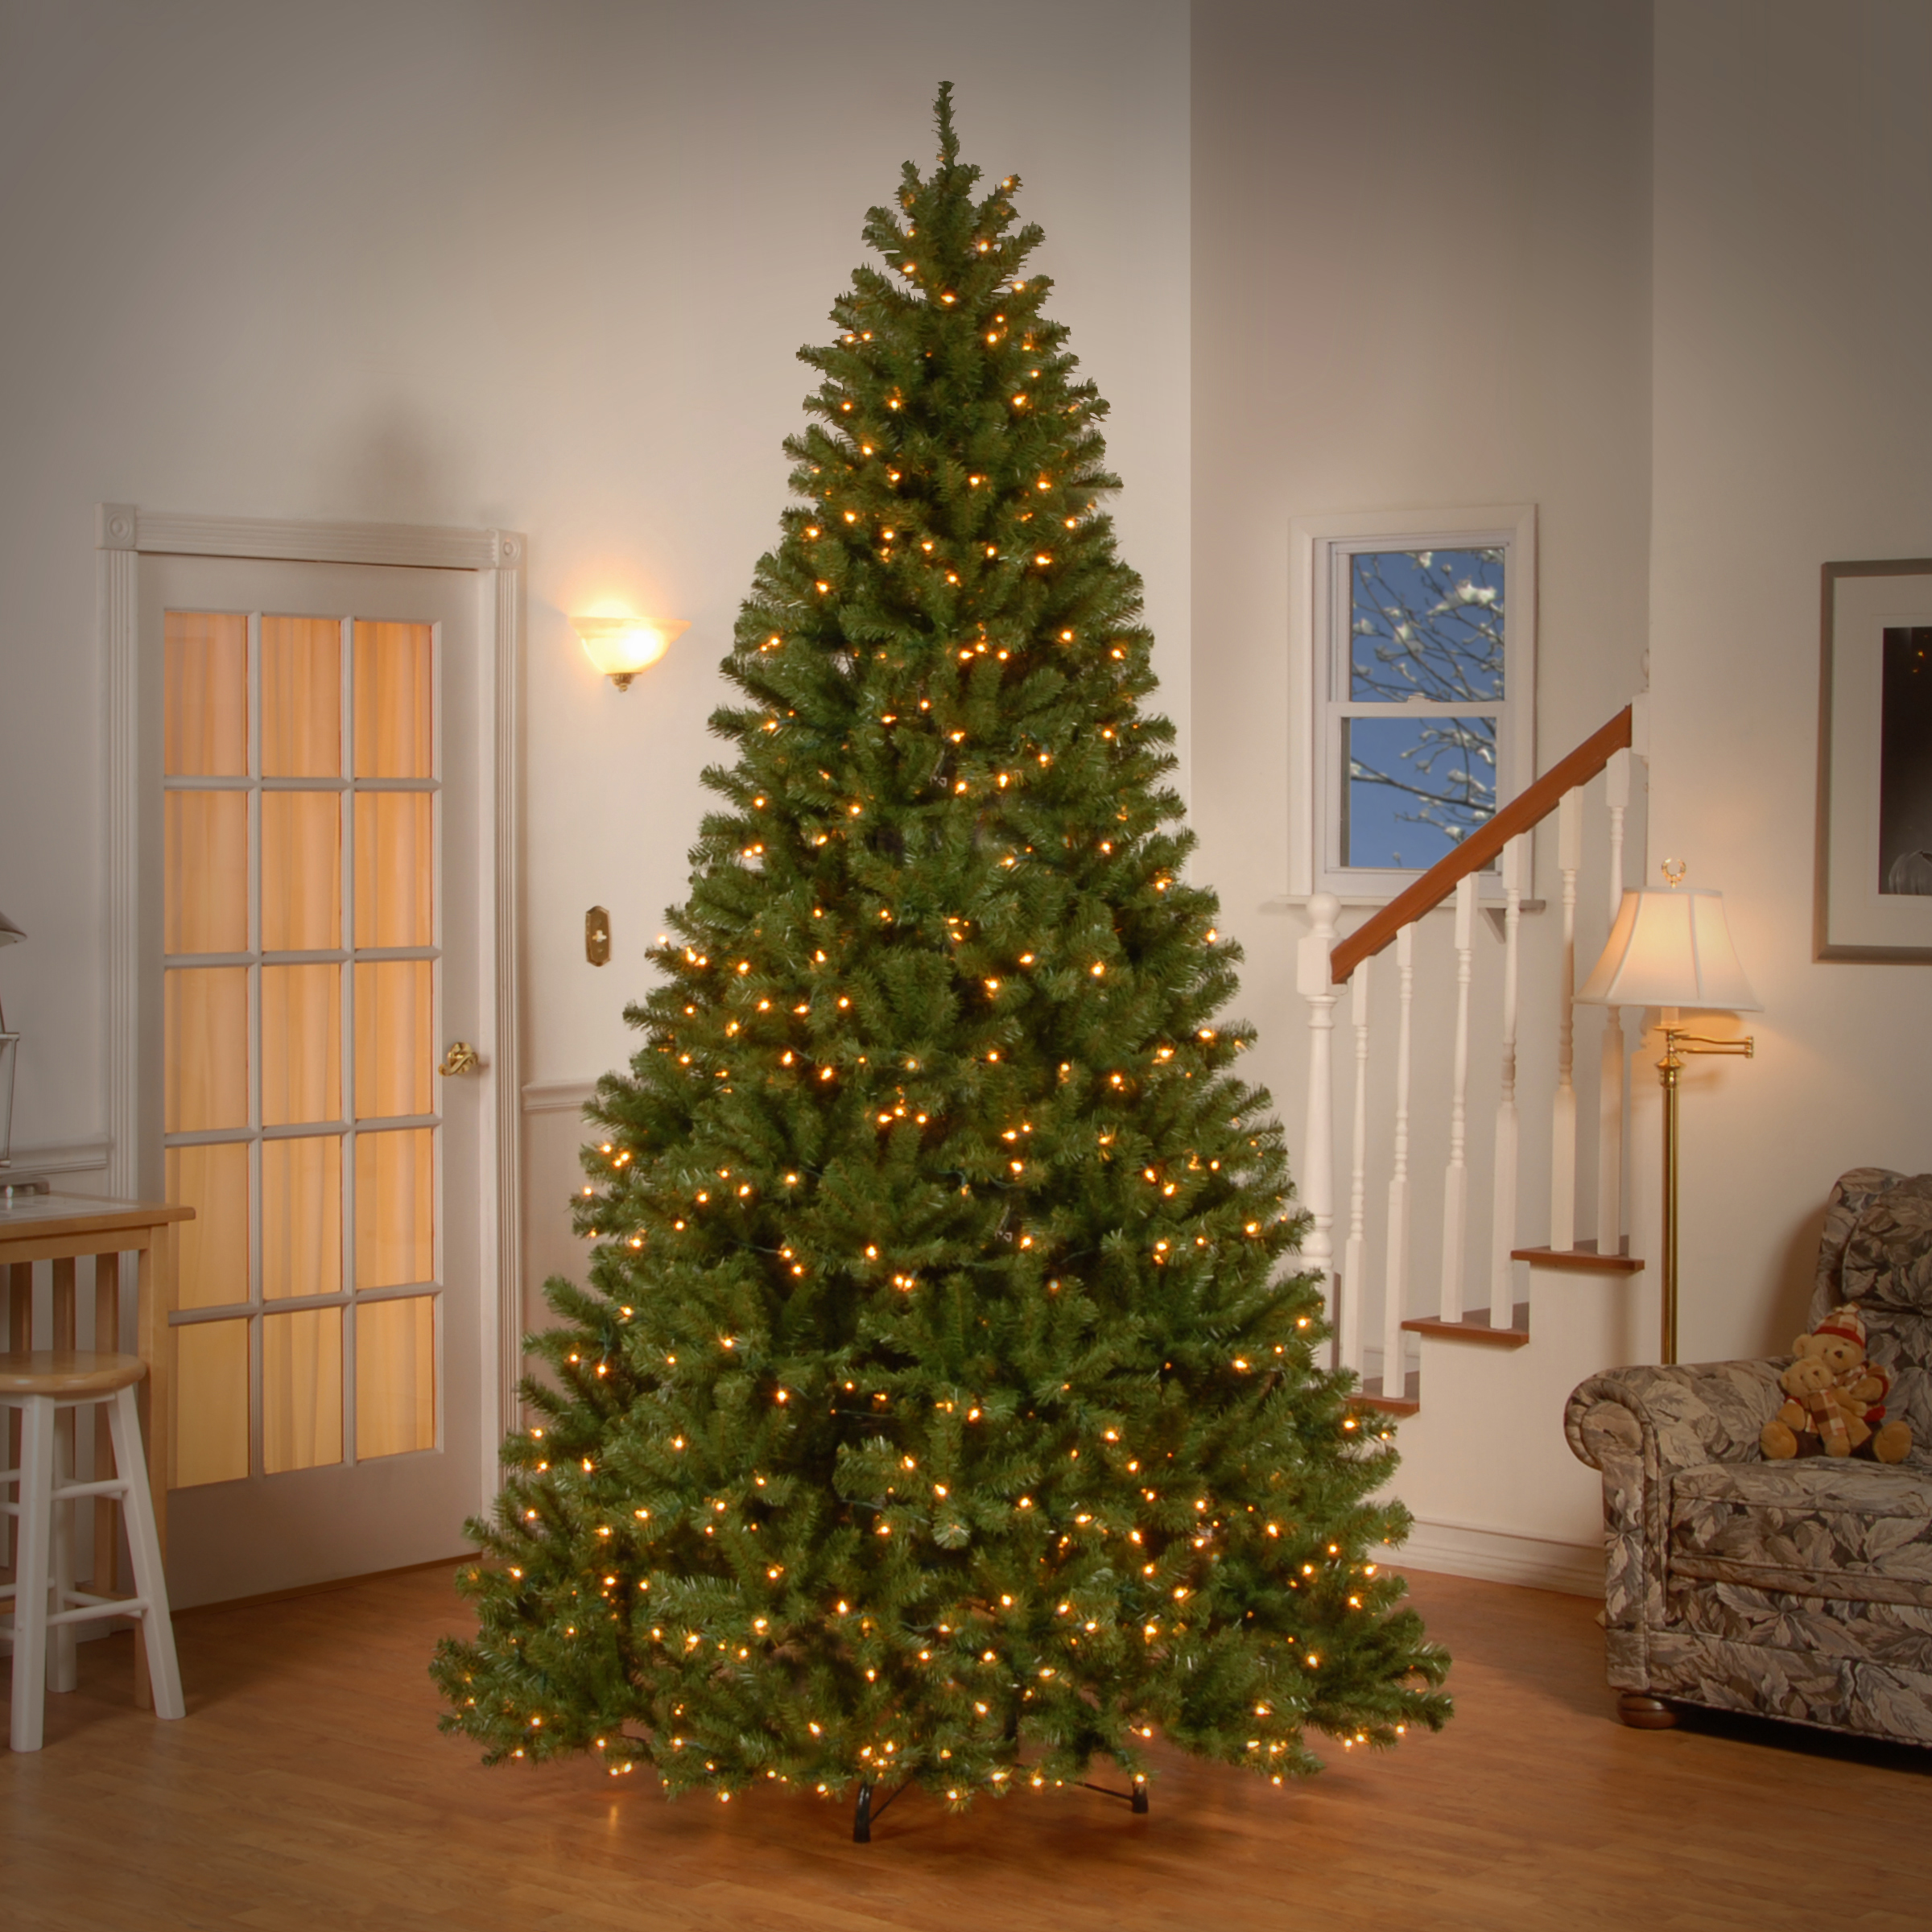 National Tree Company Clear Prelit LED Green Spruce Christmas Tree, 9' - image 2 of 3